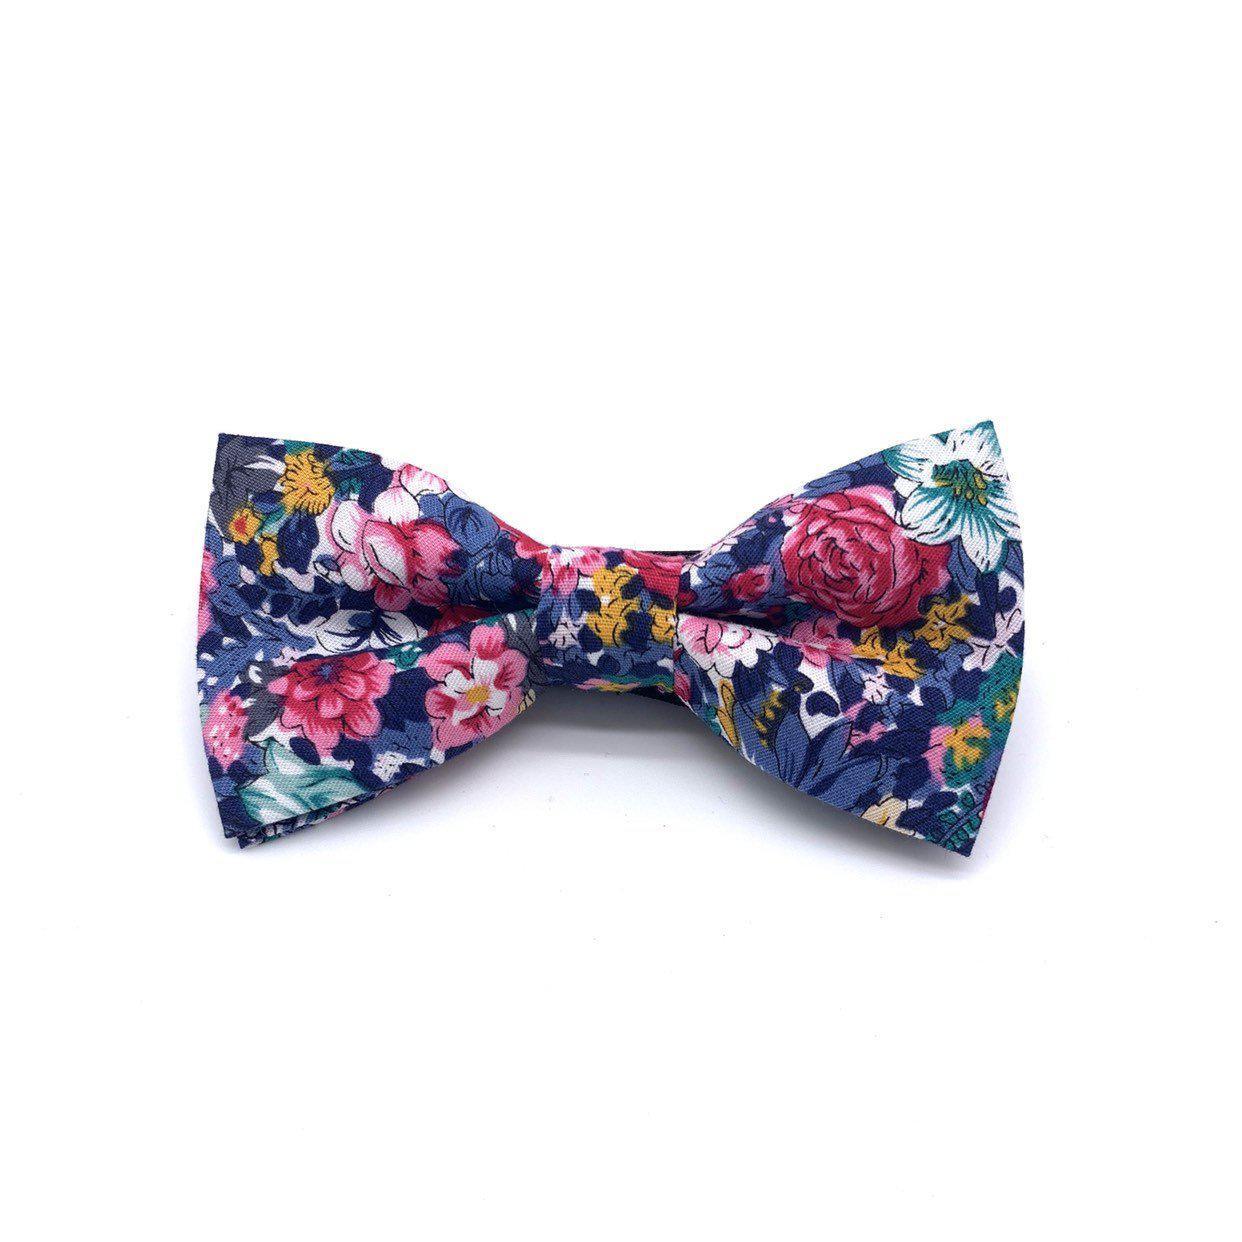 Pink Kids Floral Pre-Tied Bow Tie (ROBERT)-Make dressing up a breeze with our pre-tied bow tie. This dapper bow tie is perfect for any special occasion. With a sweet floral print and a playful green color, it&#39;s sure to add a touch of fun to your little one&#39;s outfit. With an adjustable neckband and easy-to-use clip closure, our bow tie is a breeze to put on and take off. So whether it&#39;s for a party or just for everyday wear, your child is sure to love our ROBERT tie. Strap is adjustablePre-Tied b